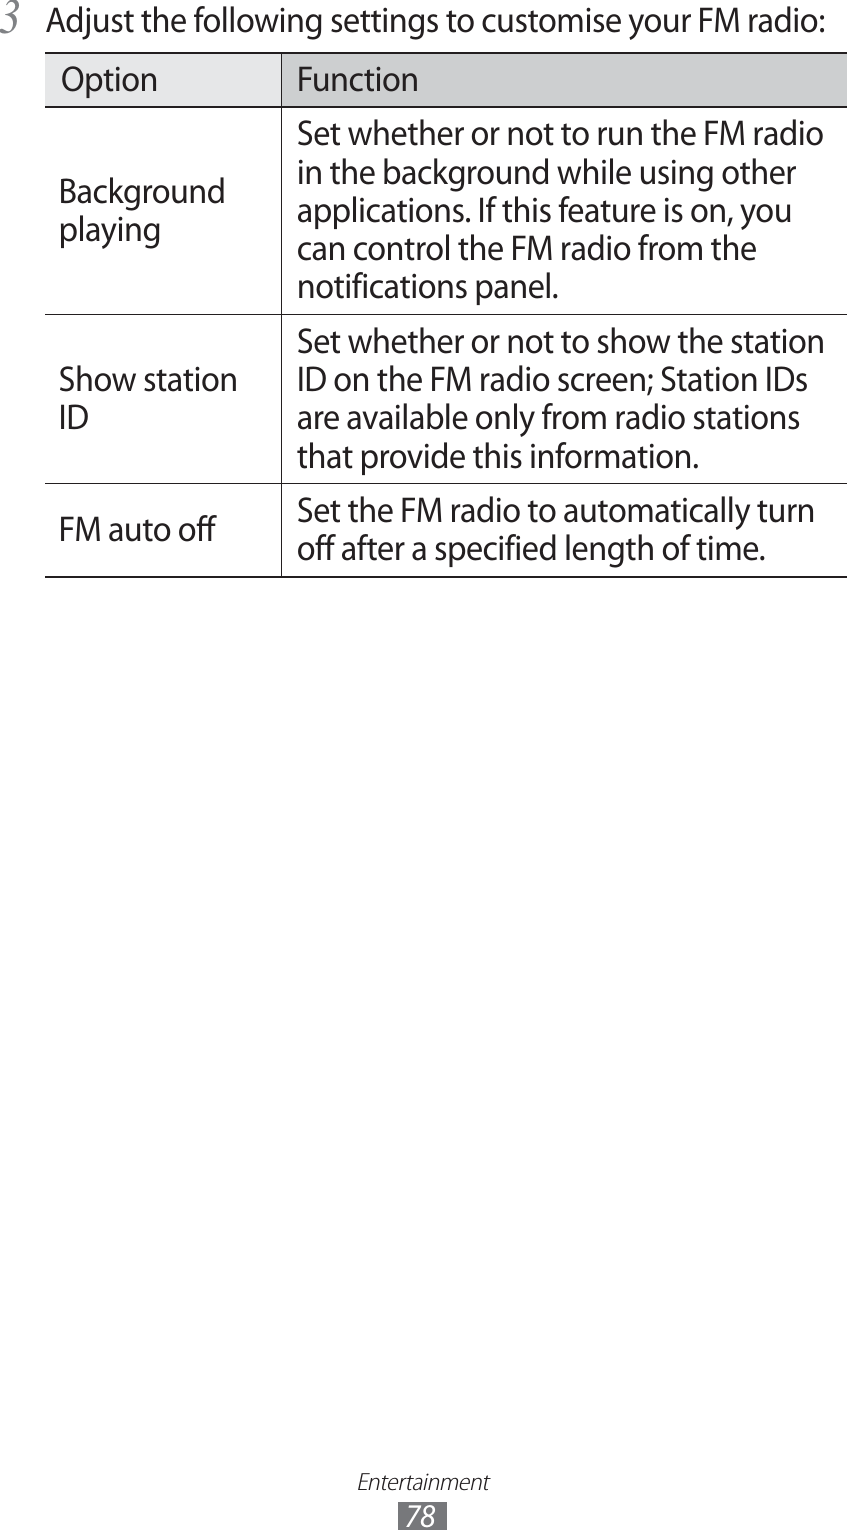 Entertainment78Adjust the following settings to customise your FM radio:3 Option FunctionBackground playingSet whether or not to run the FM radio in the background while using other applications. If this feature is on, you can control the FM radio from the notifications panel.Show station IDSet whether or not to show the station ID on the FM radio screen; Station IDs are available only from radio stations that provide this information.FM auto off Set the FM radio to automatically turn off after a specified length of time.